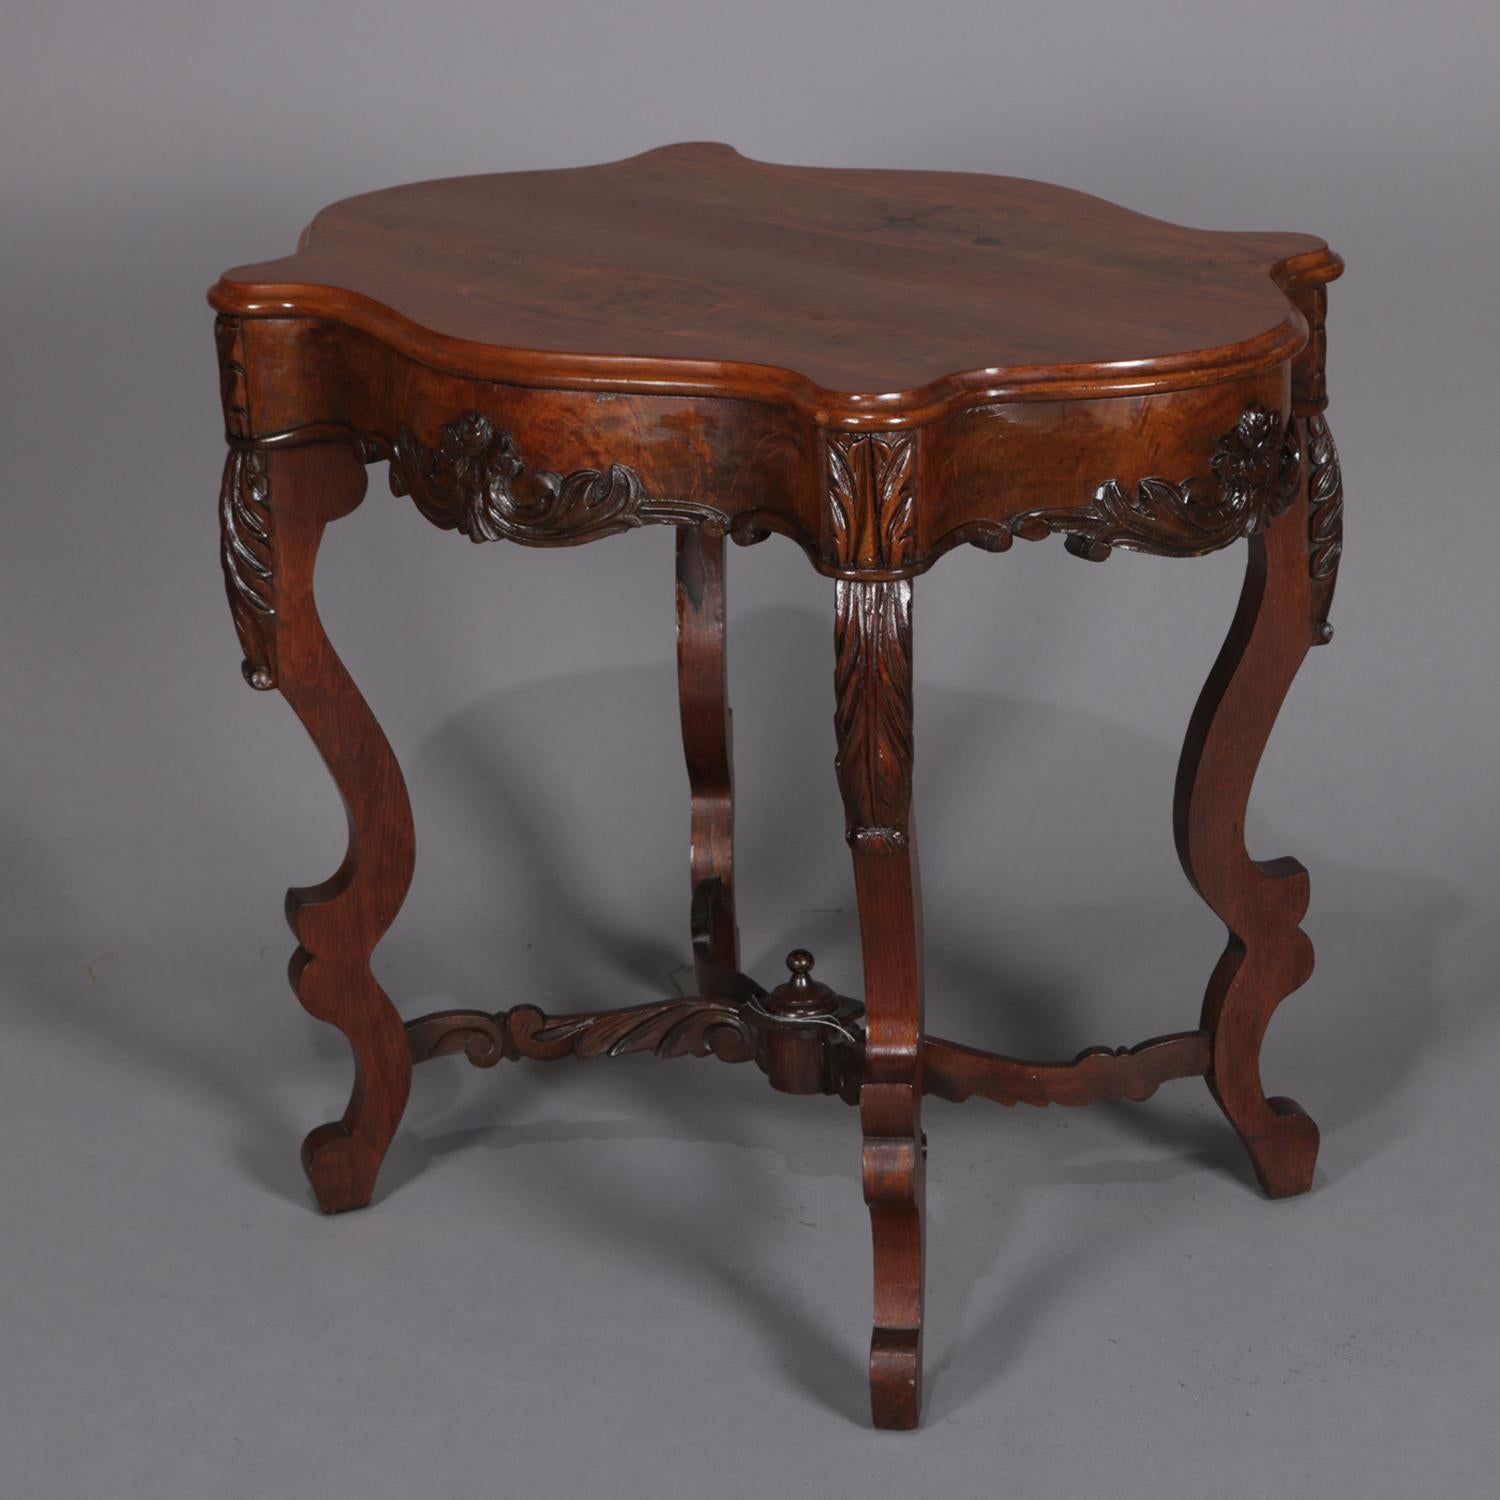 American Antique Foliate and Floral Carved Walnut Center Table, circa 1890